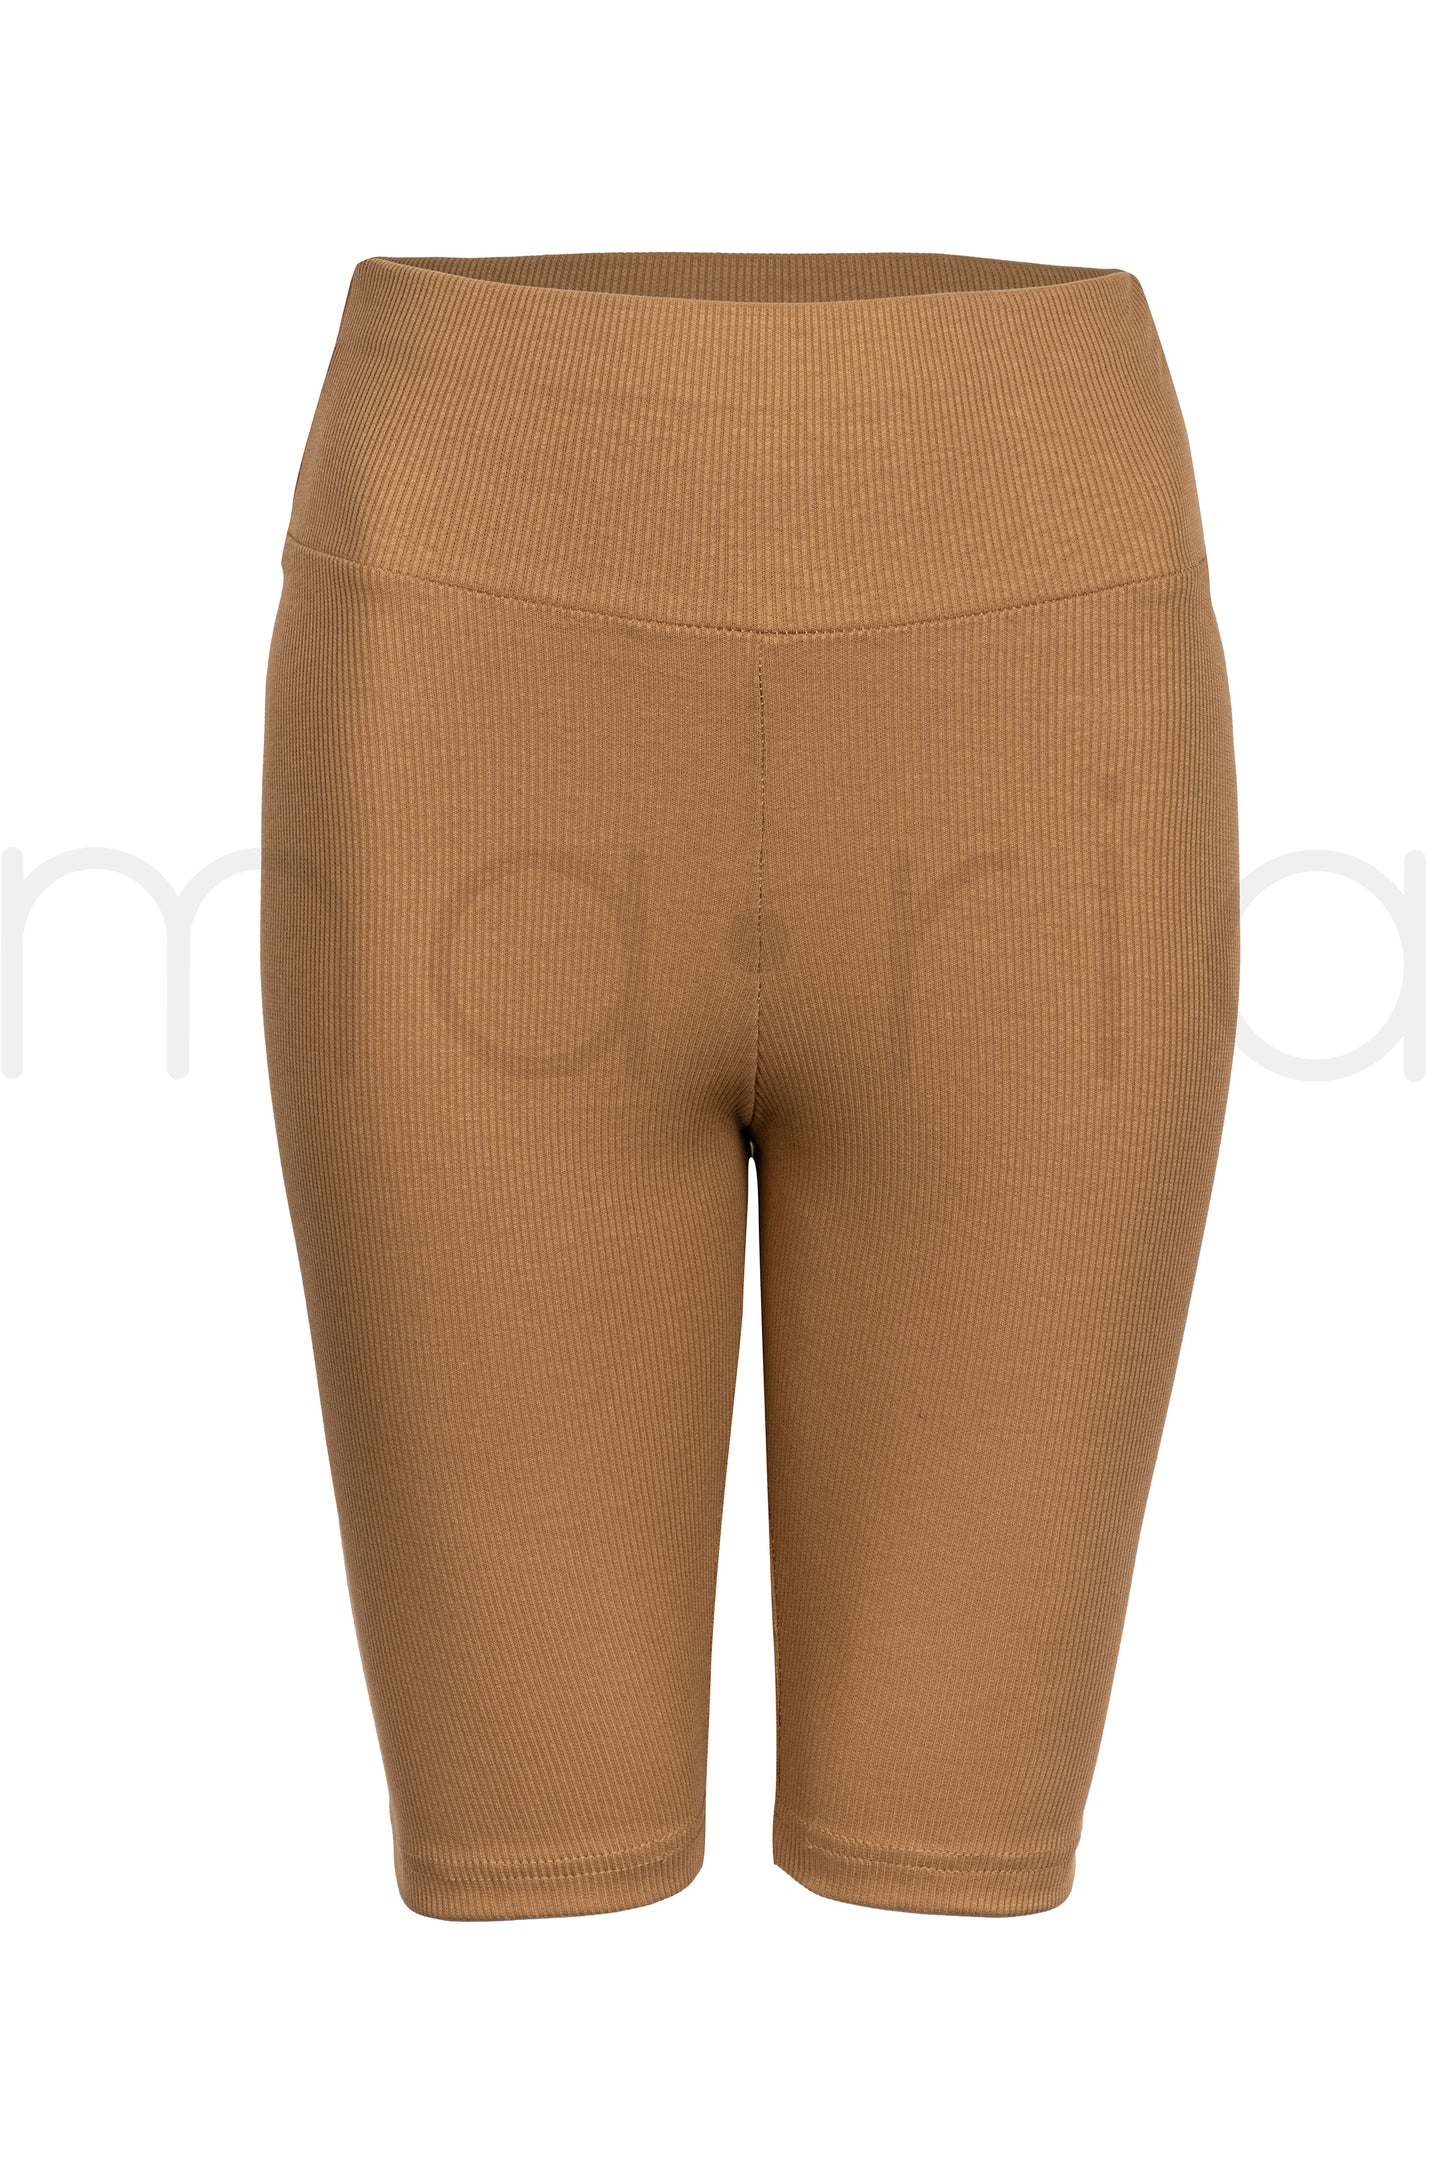 1/2 ribbed leggings with a high waist, cotton sports cyclists